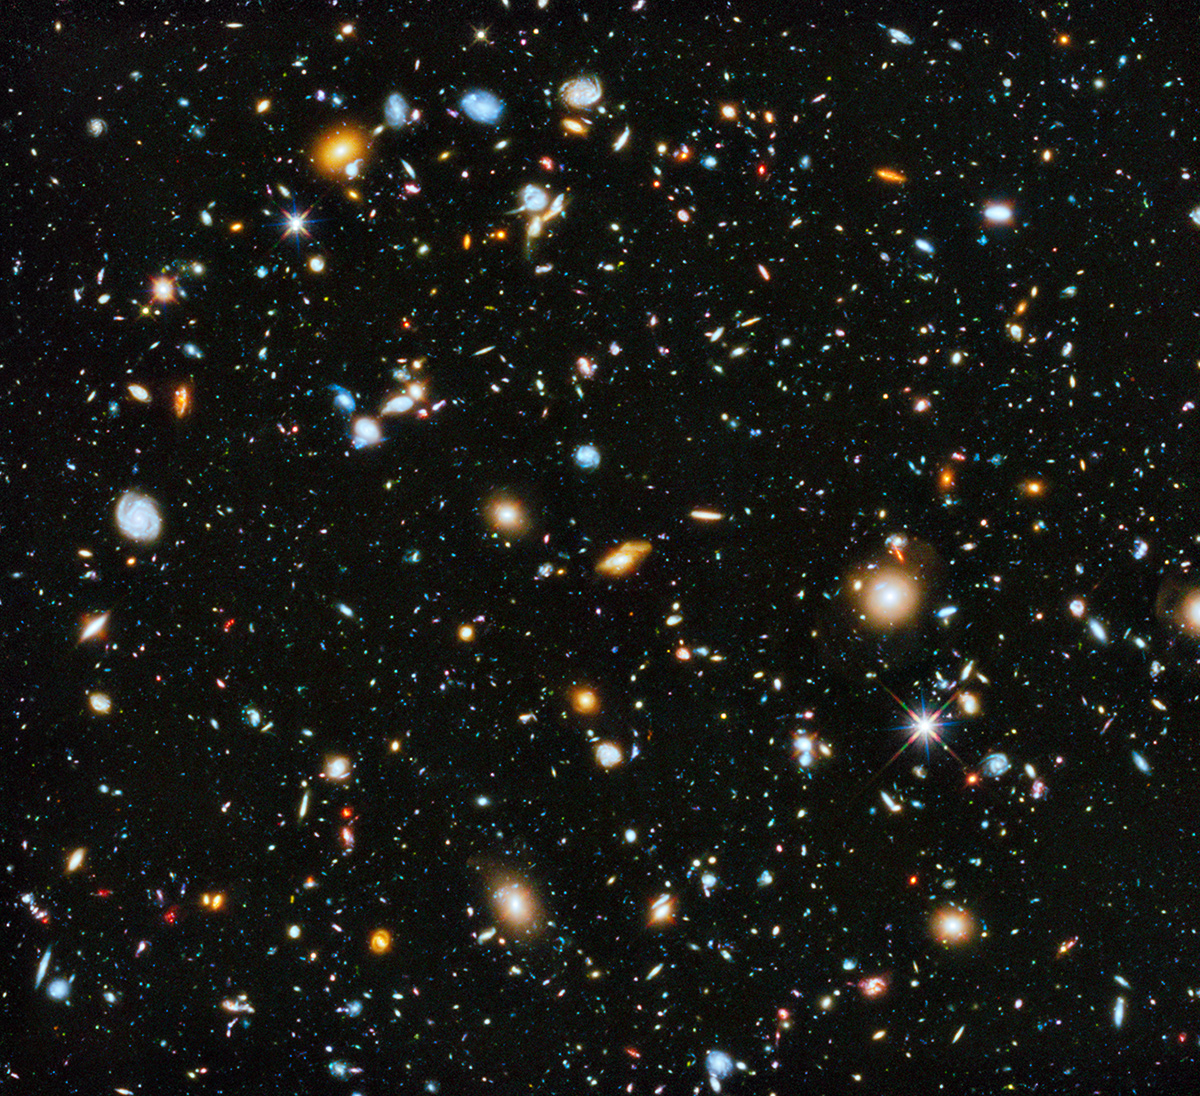 This composite image from the Hubble Space Telescope (HST) showing approximately 10,000 galaxies in brilliant color took nine years to assemble, and sheds light upon star formation in our universe. Image Credit: NASA/ESA